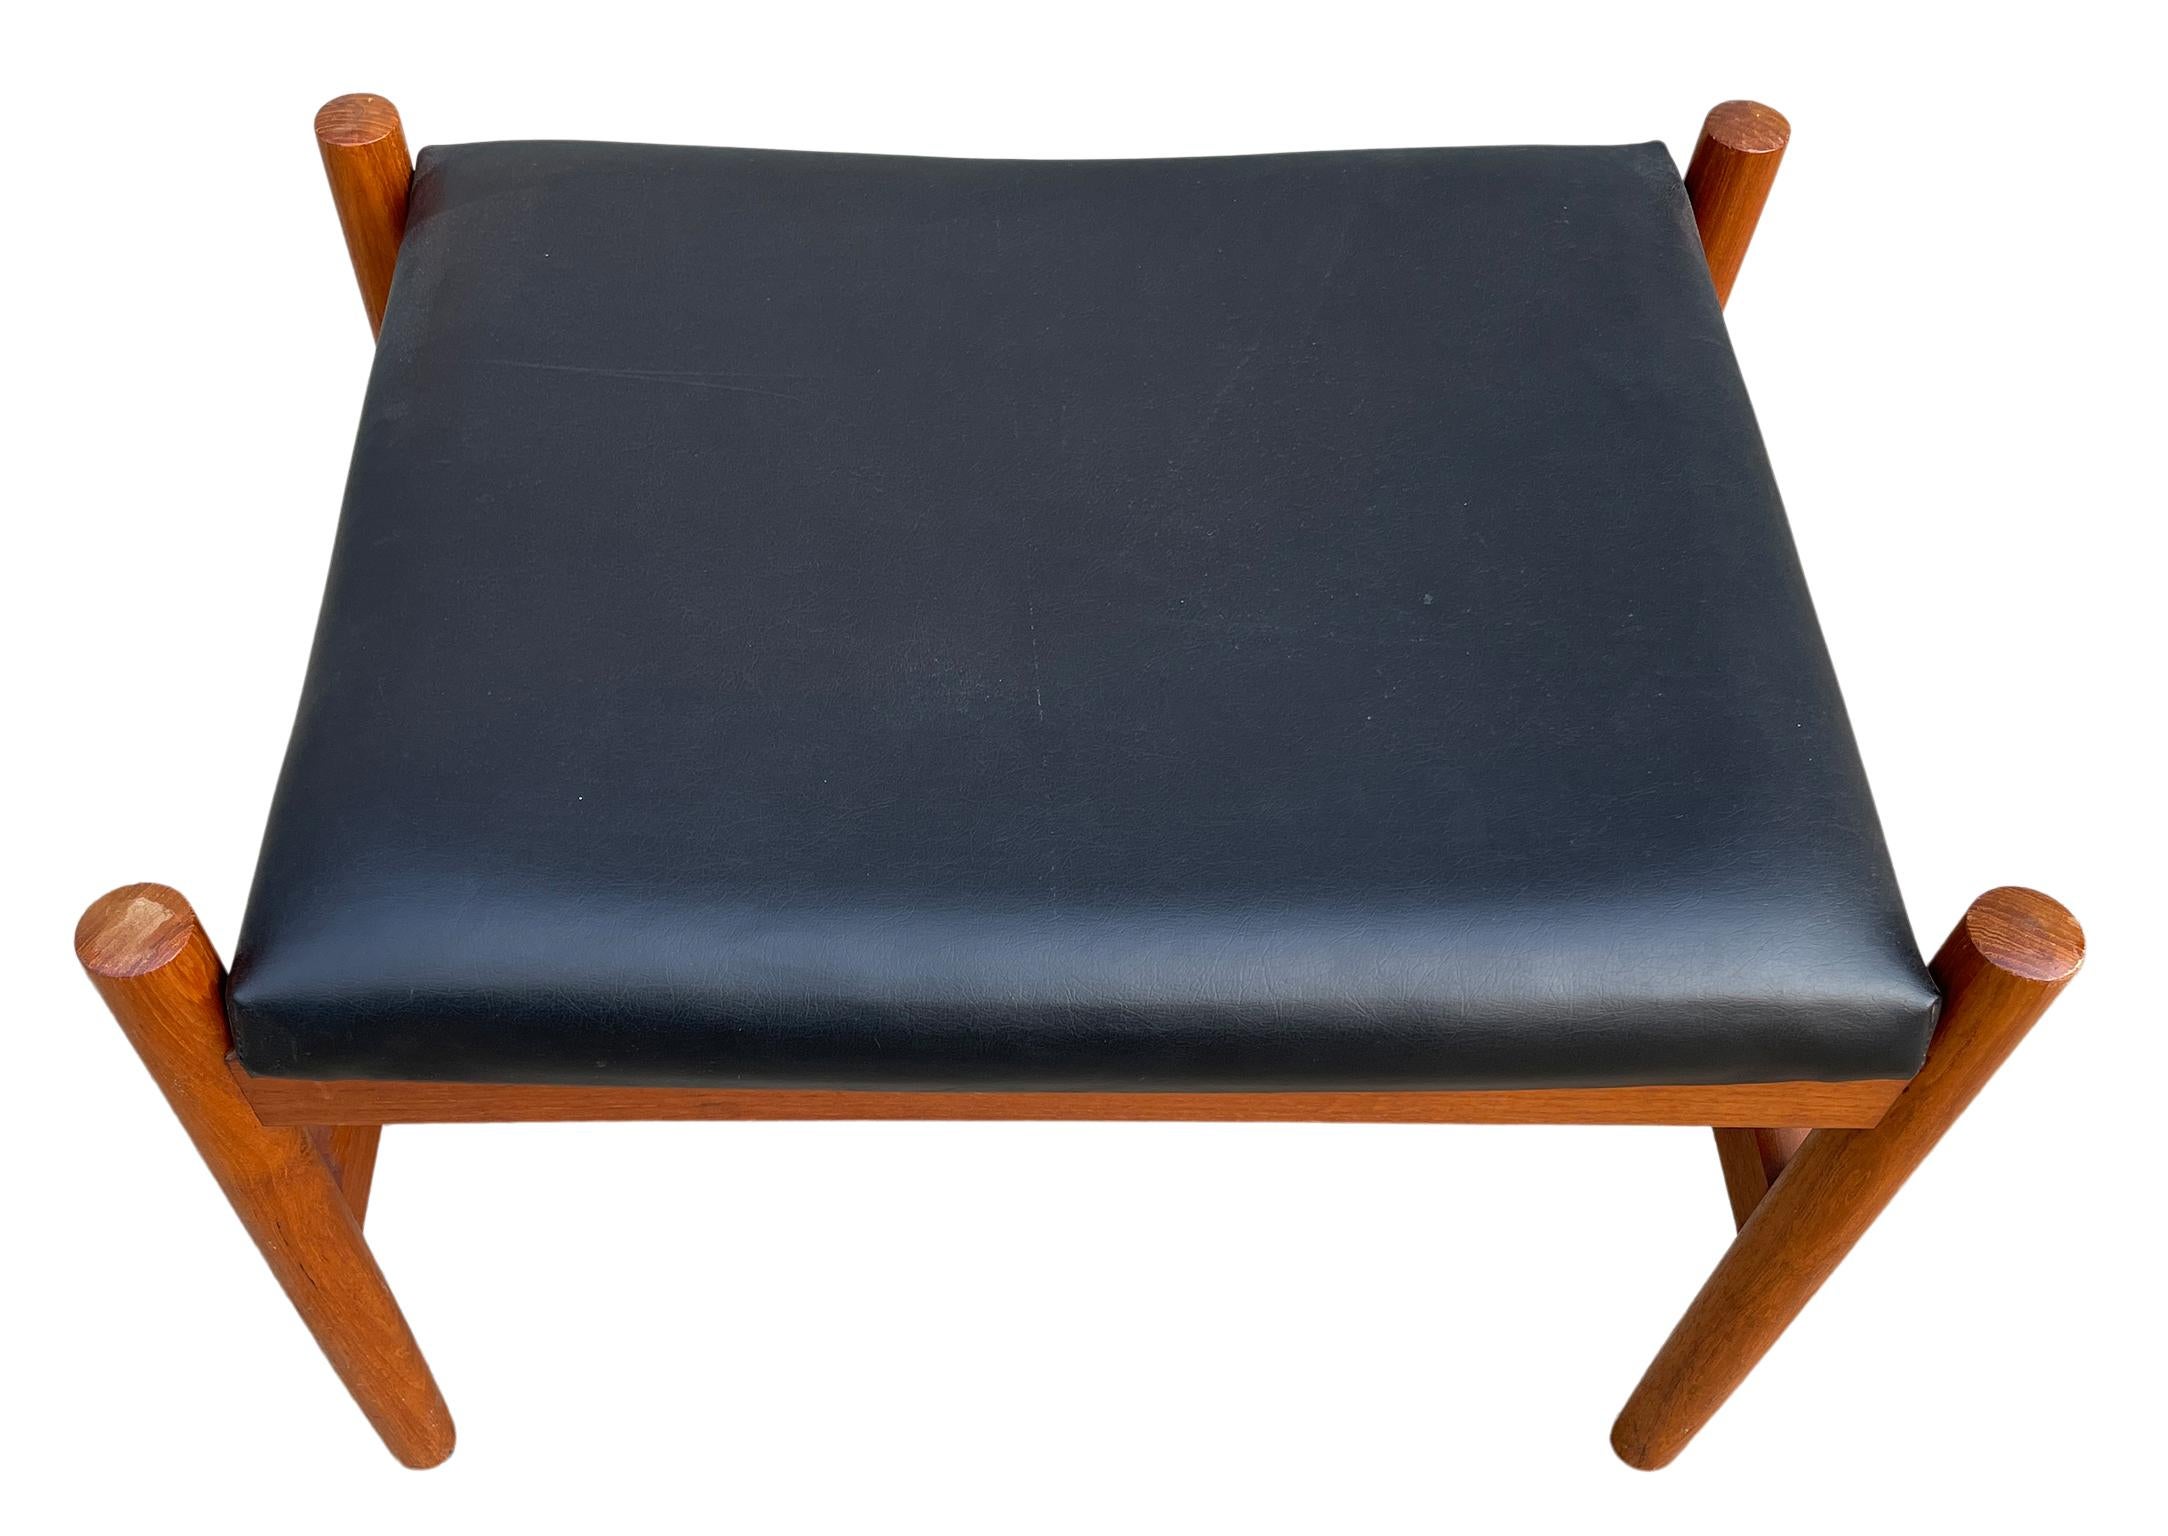 Mid century Danish modern spottrup mobler teak and leather small stool bench or ottoman. Solid teak - Danish burn label - black leather seat cushion. Great vintage condition.